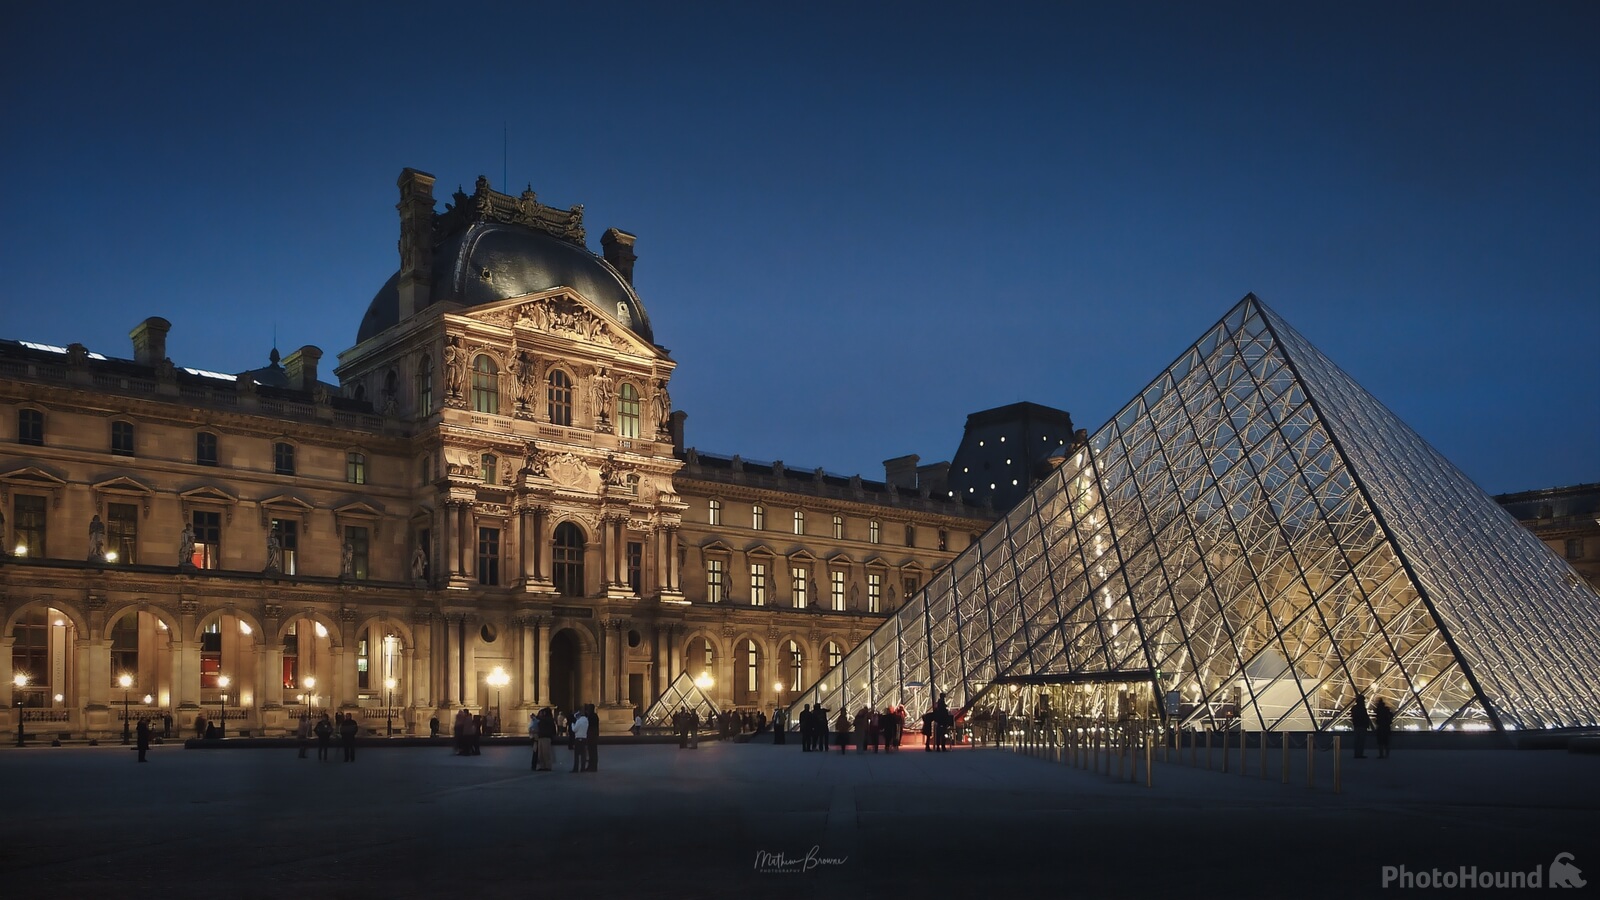 Image of Pyramide du Louvre (Louvre Exterior) by Mathew Browne